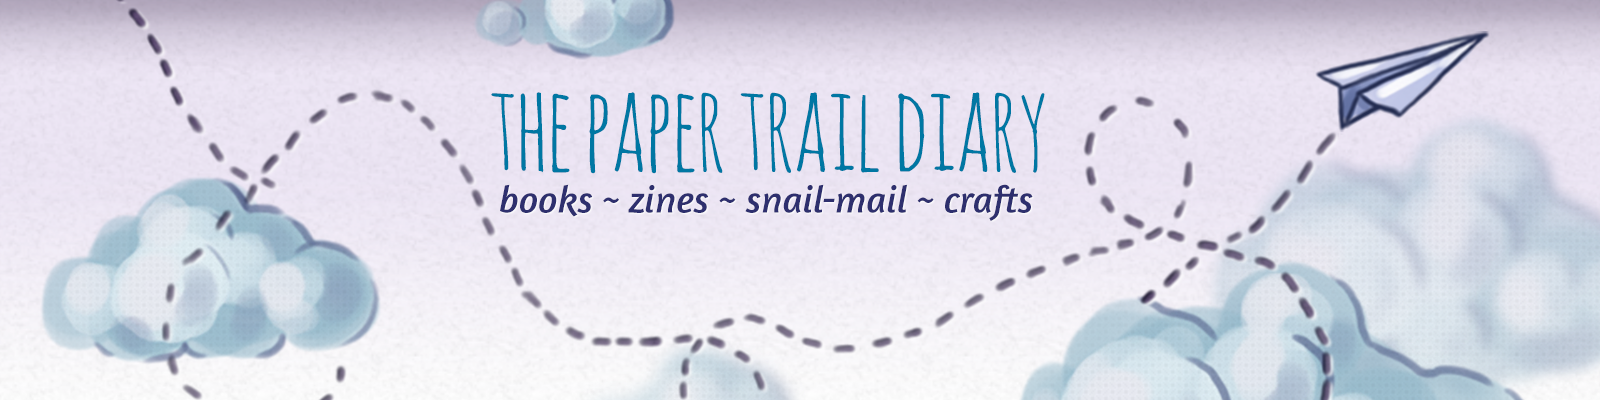 The Paper Trail Diary